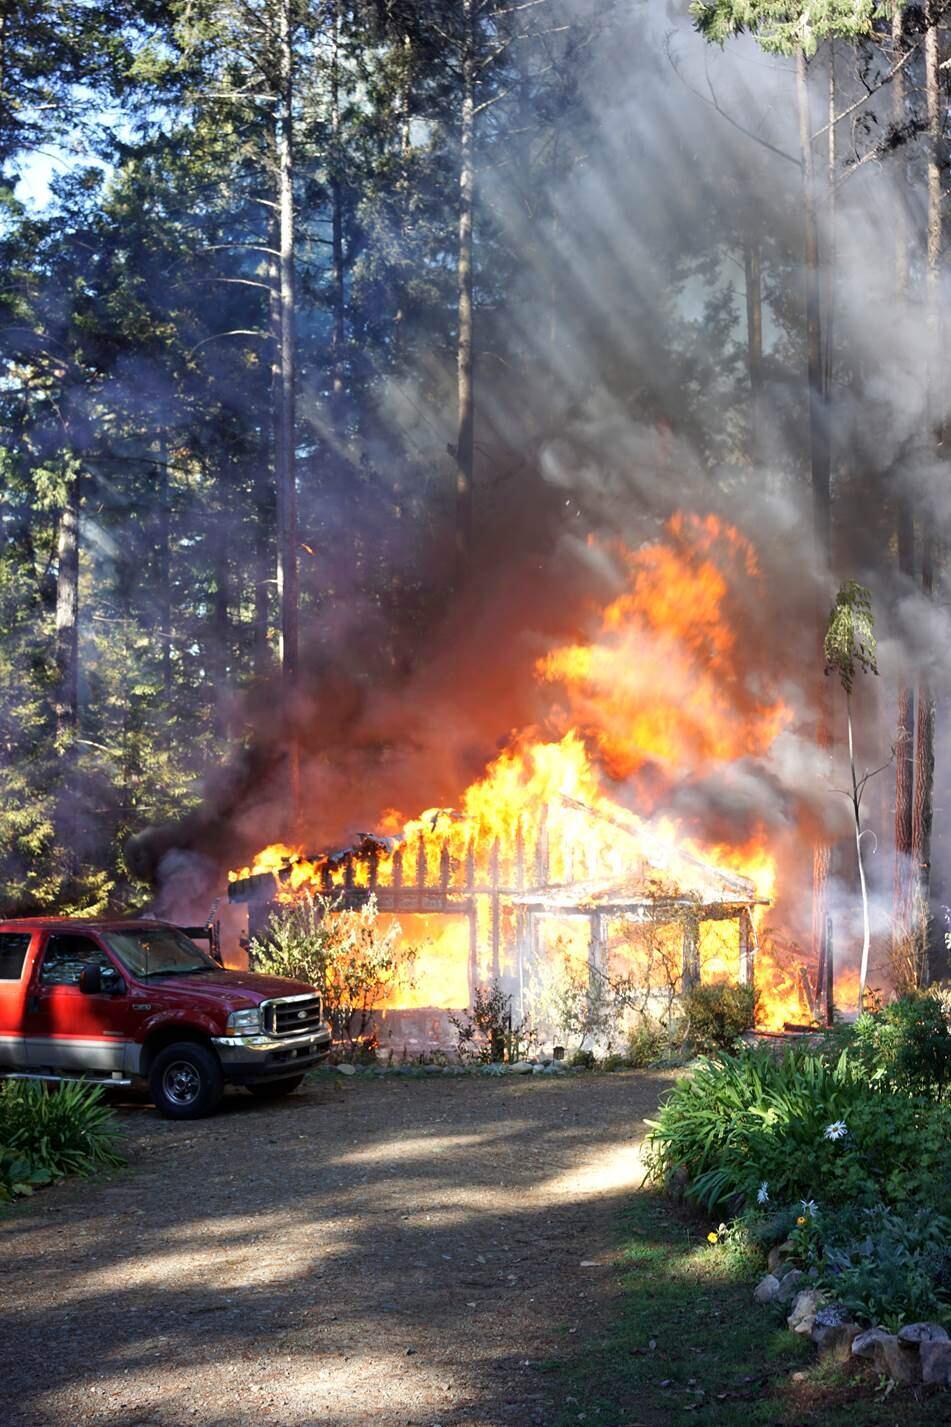 This photo of the home in flames was taken by Philip Barlow.